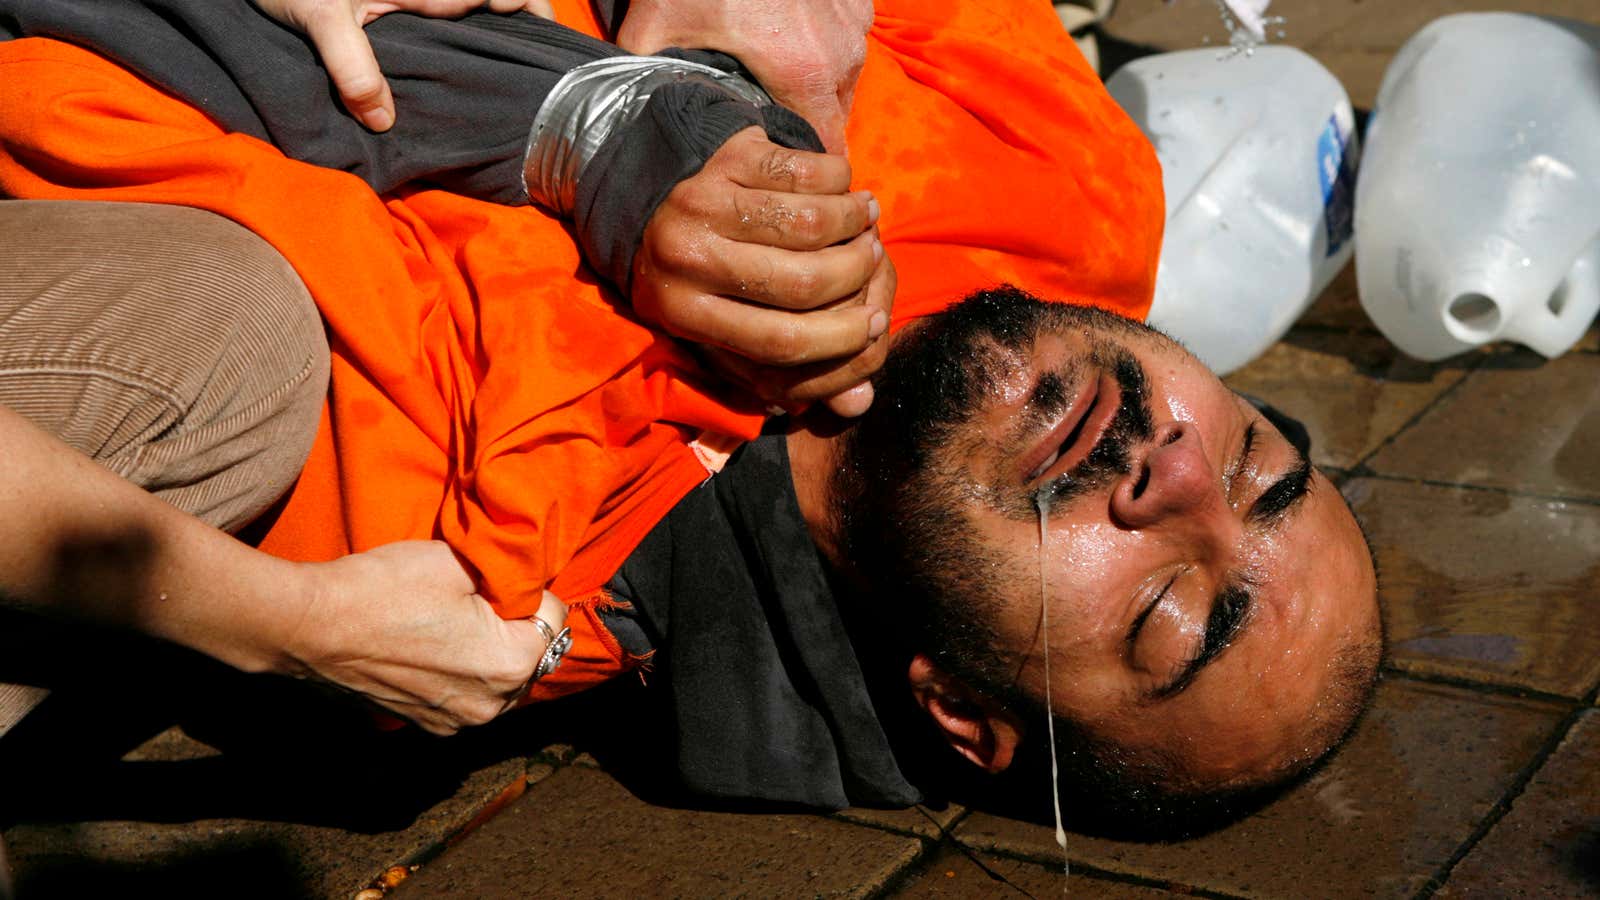 A demonstrator at a 2007 protest of waterboarding in Washington DC.